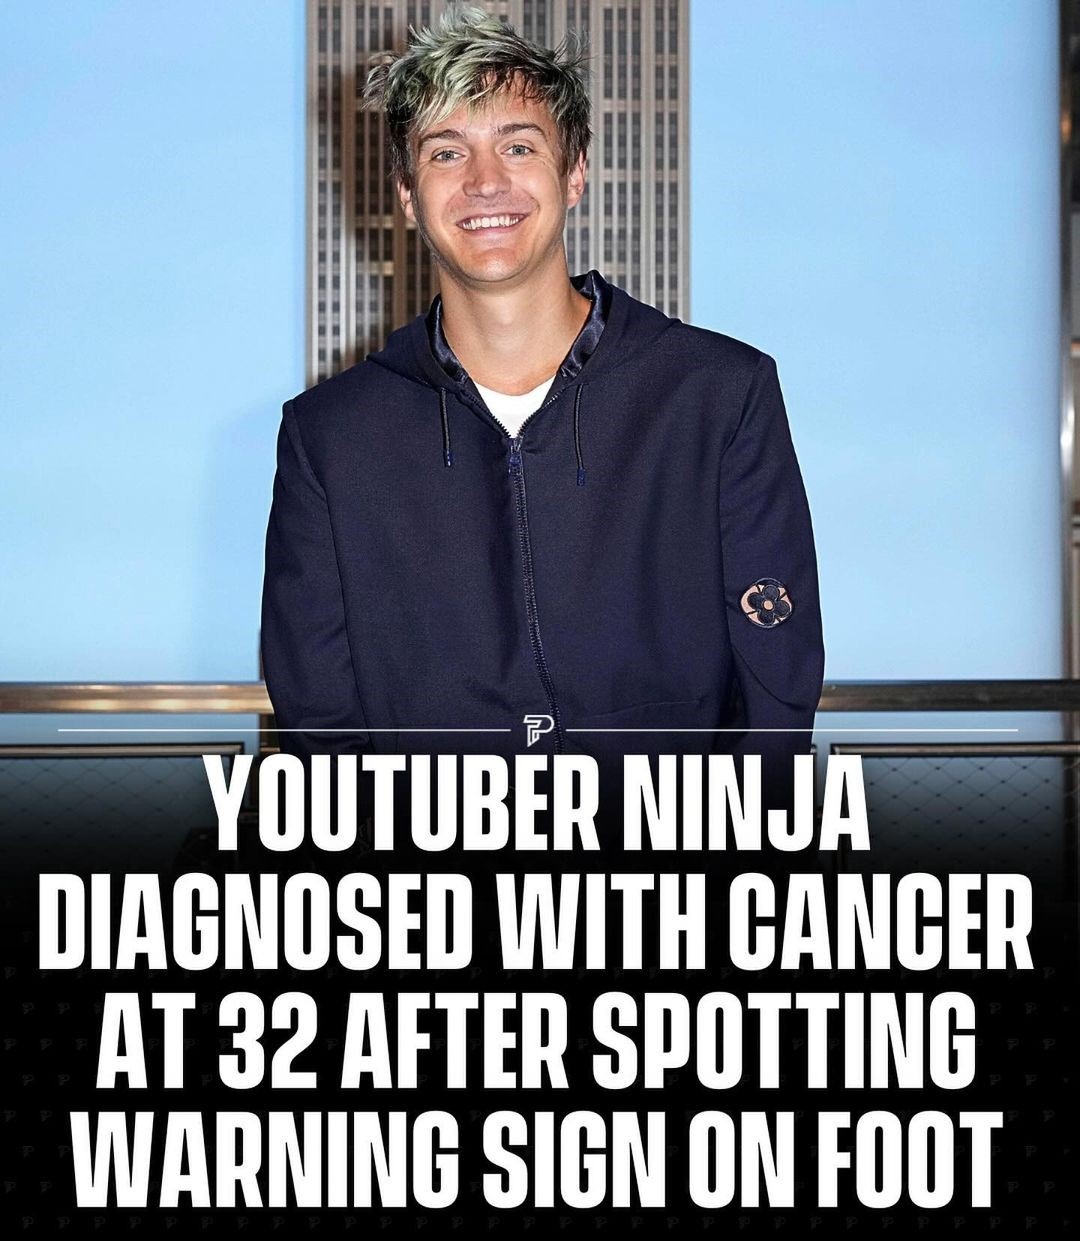 Gaming influencer Ninja, Tyler Blevins, shared with his fans that a mole on his foot was diagnosed as melanoma during a routine check-up. - meme